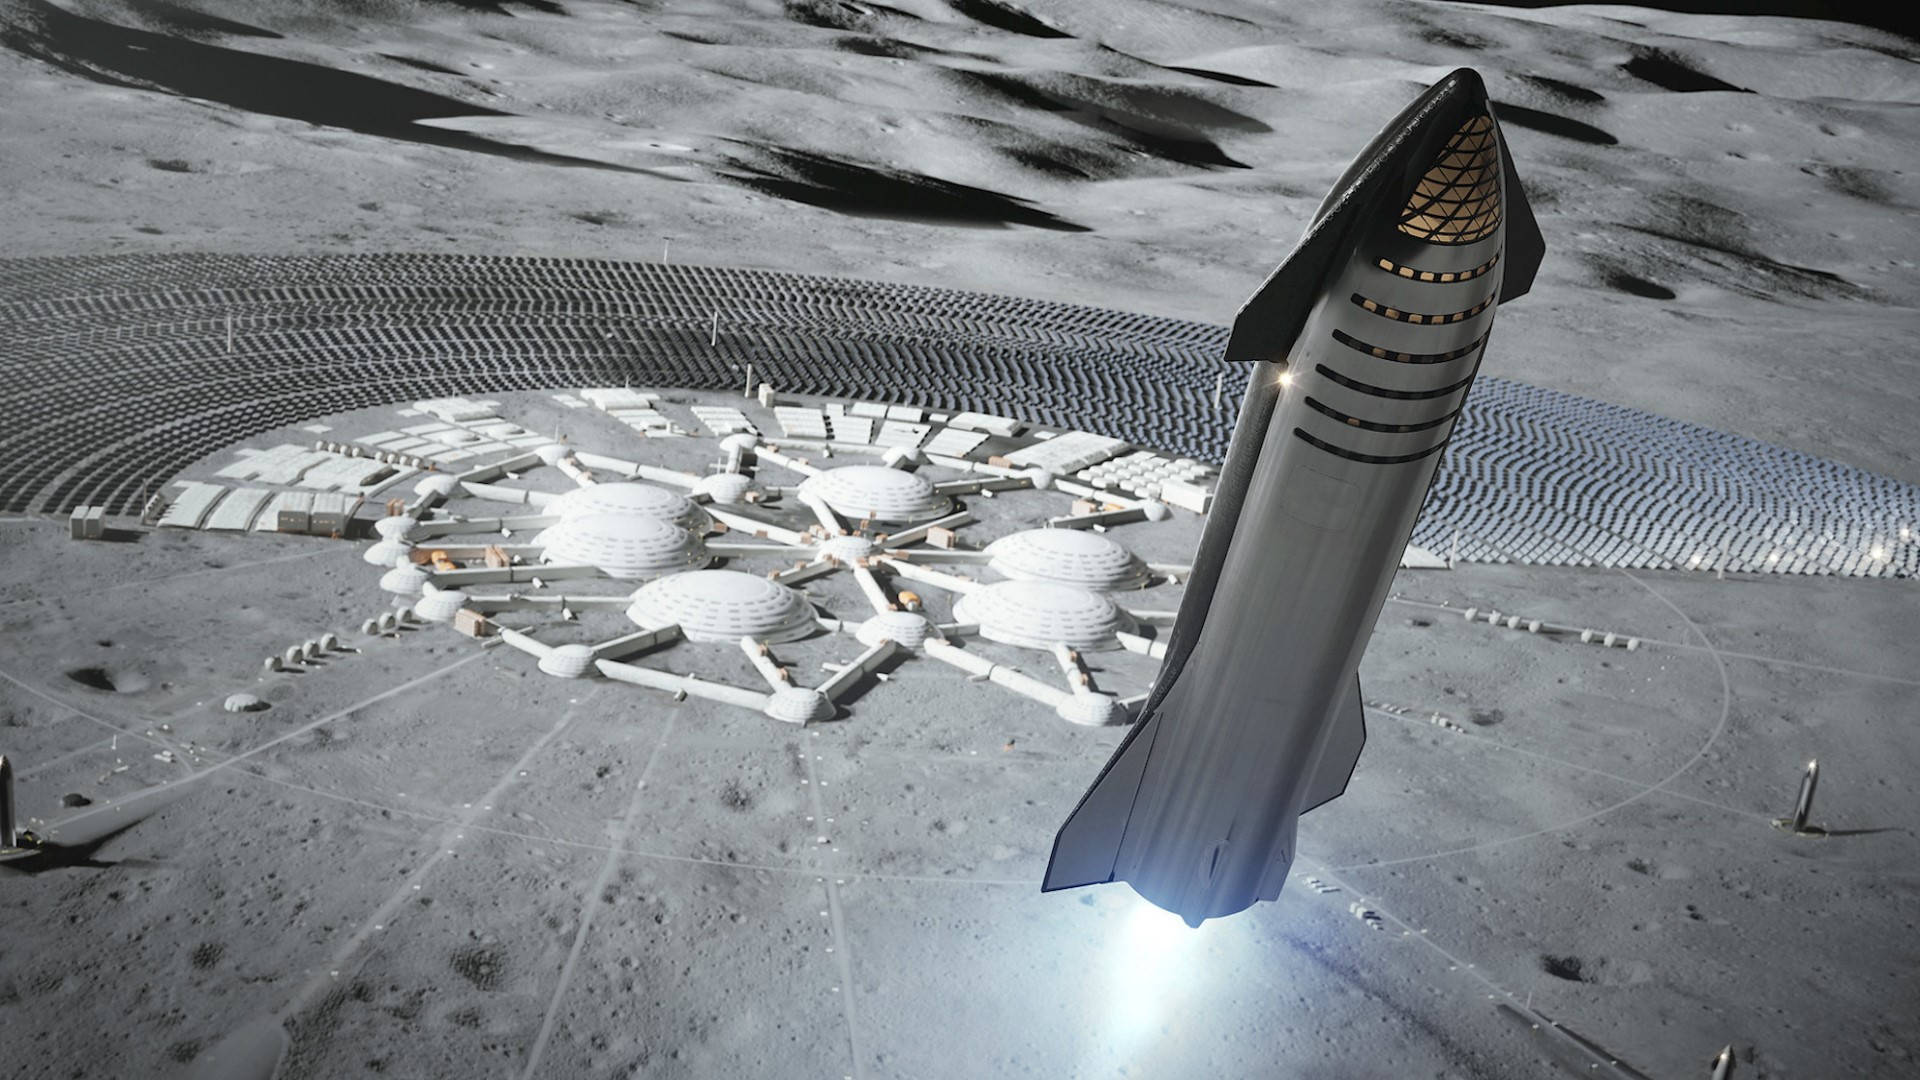 Spacex Starship Leaving Lunar Colony Wallpaper